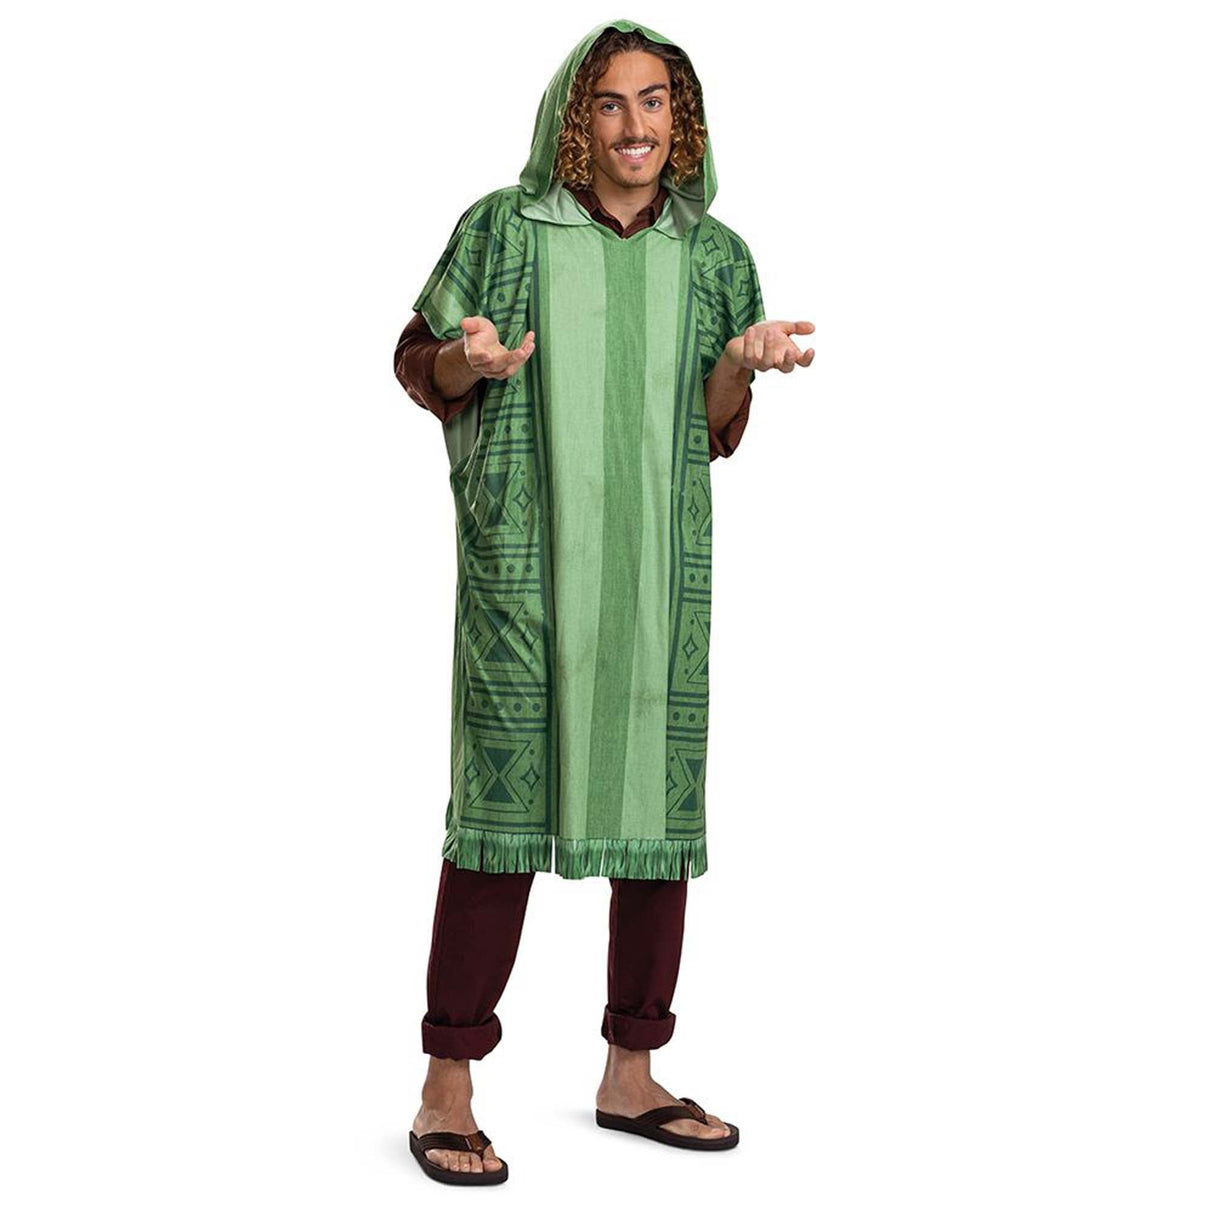 DISGUISE (TOY-SPORT) Costumes Disney Encanto Bruno Poncho Costume for Adults, Green Poncho